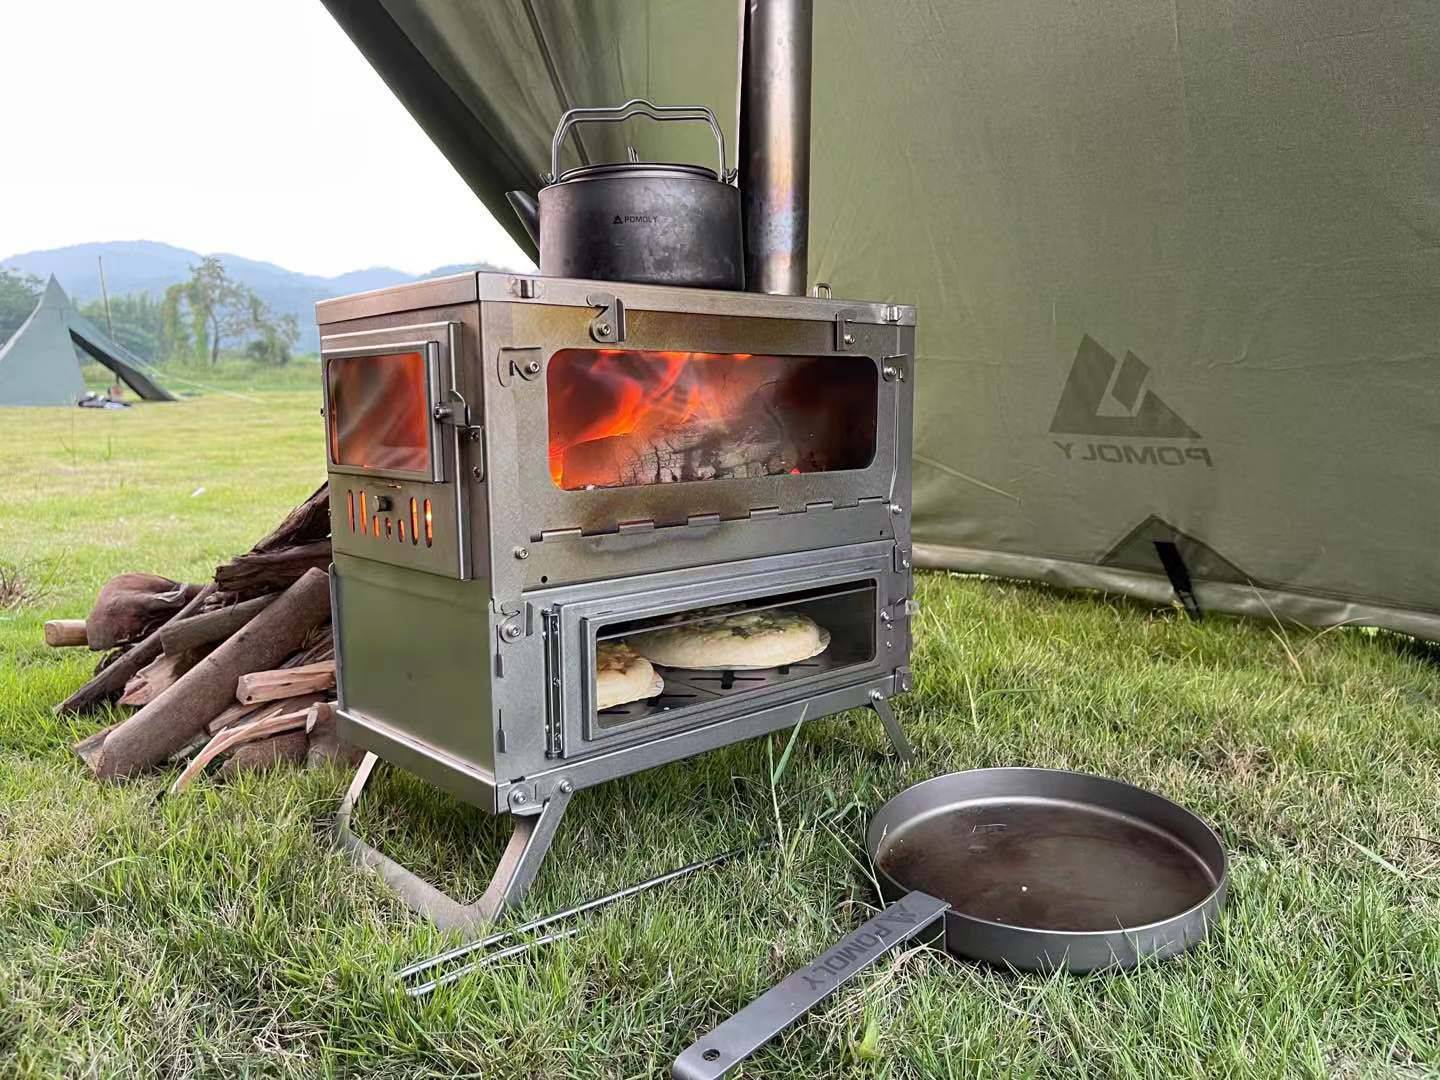 TAISOCA Titanium Stove With Oven Box – Baking Pizza Test and Review – Bushcraft Camping Adventure – BushManTrip